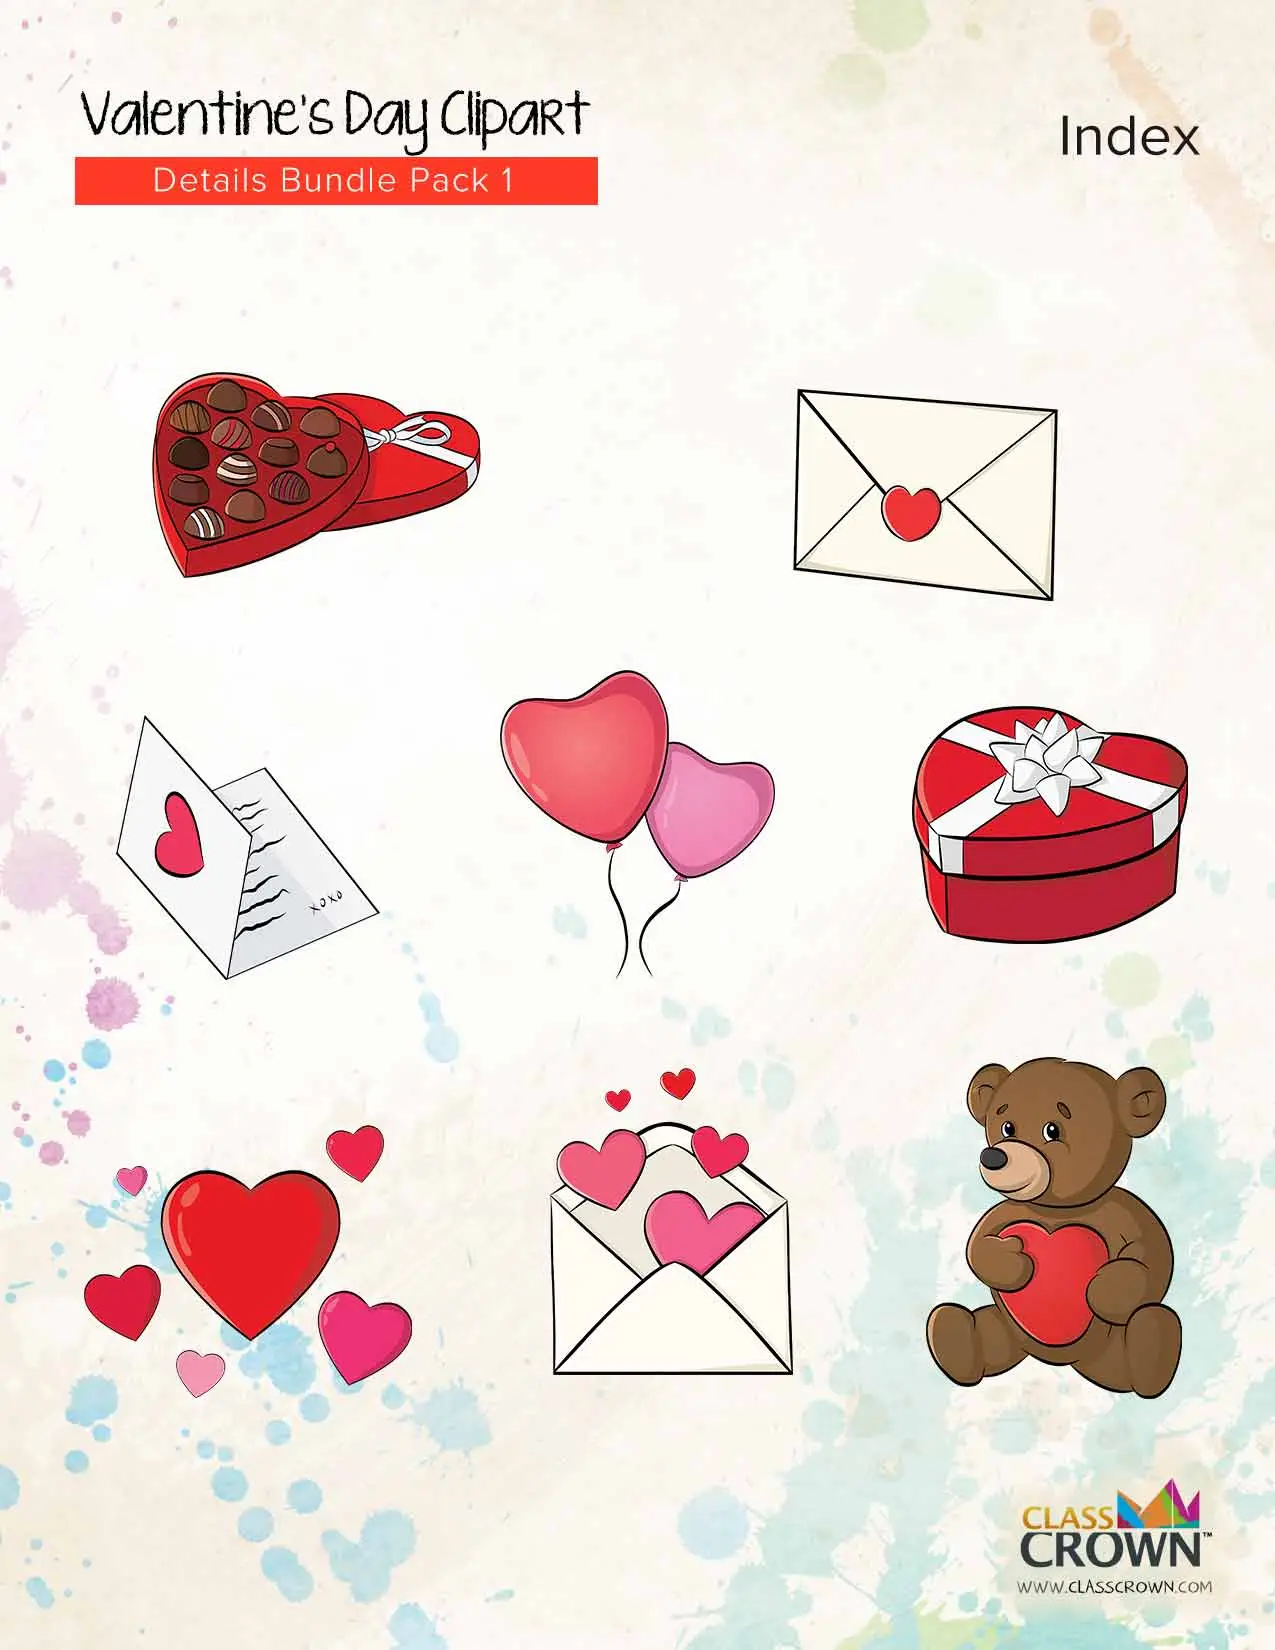 Index of Valentine's Day details pack clipart.